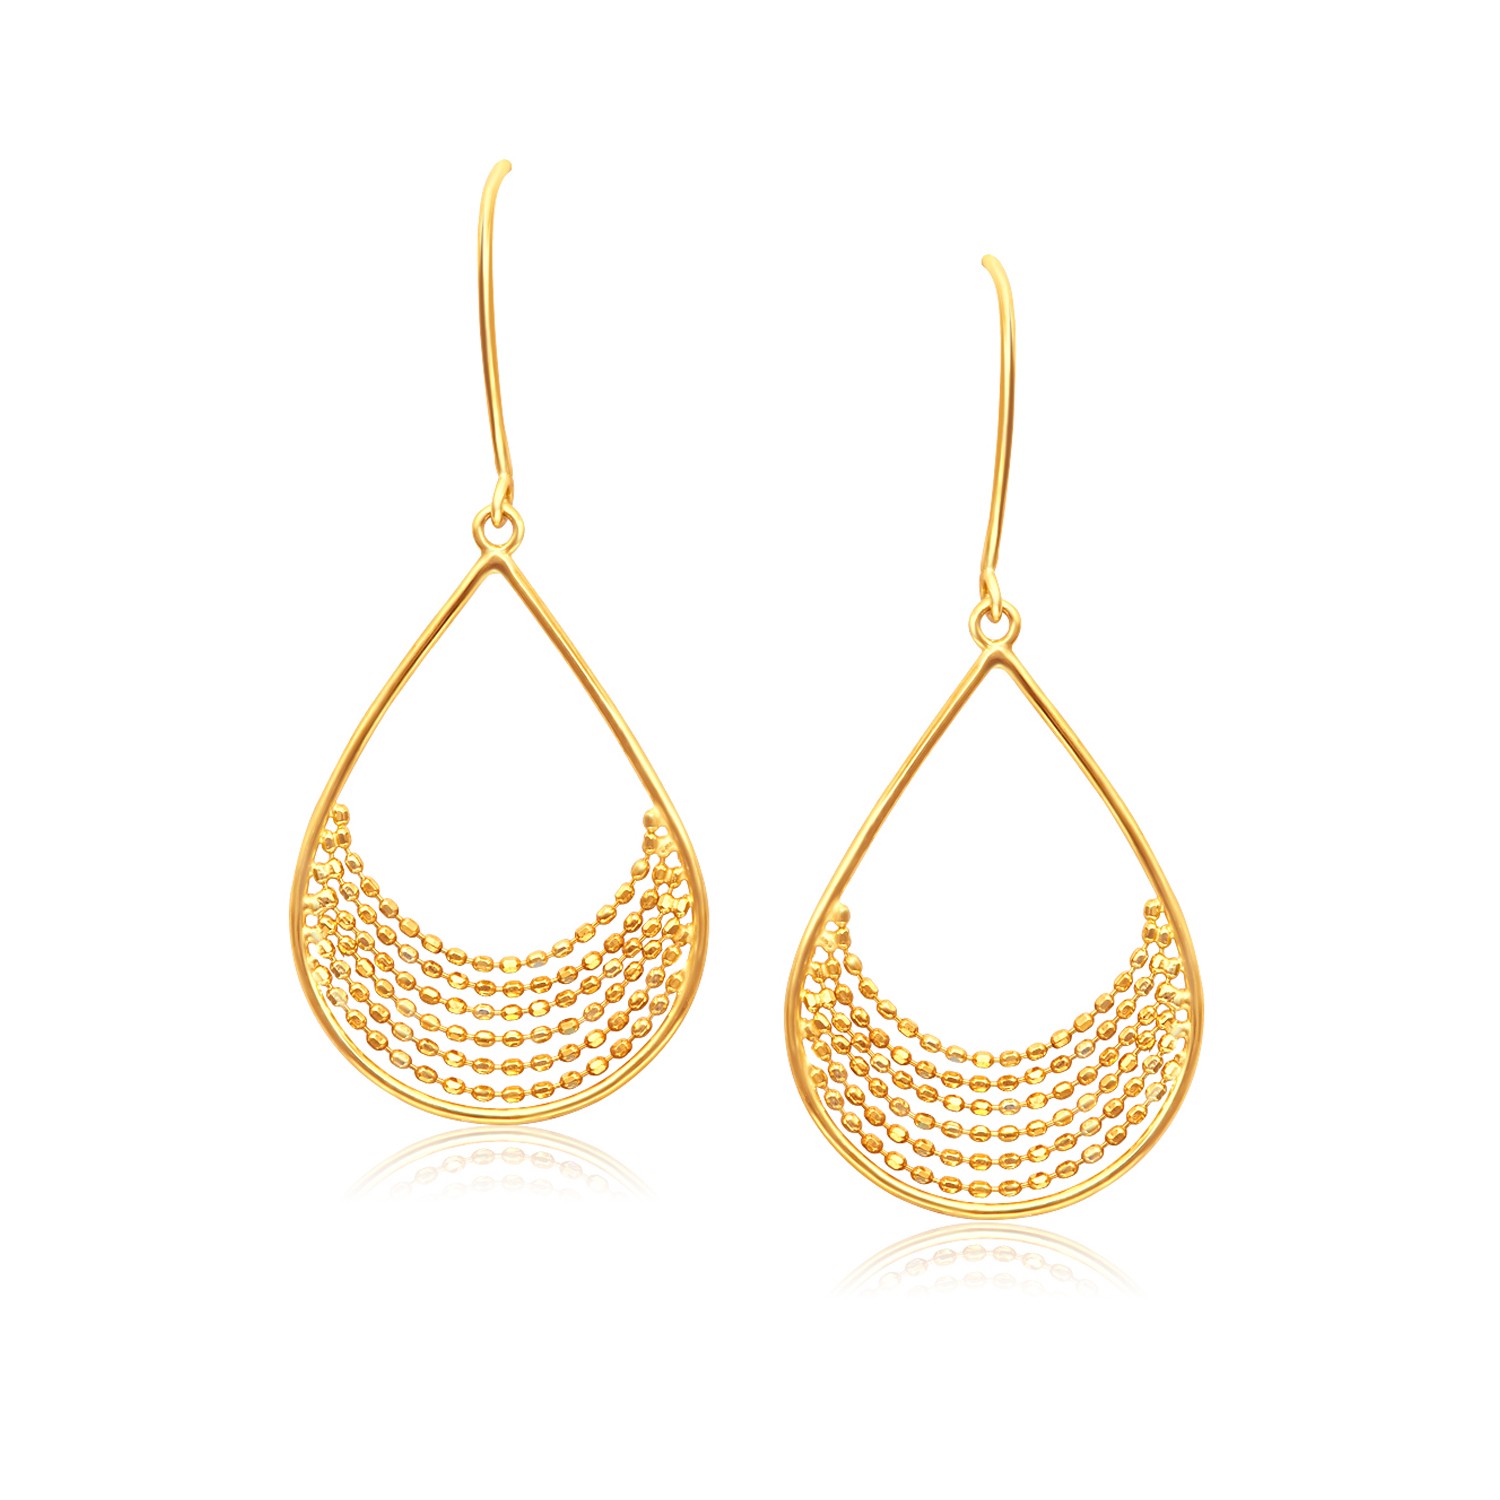 Open Teardrop Earrings with Layered Bead Chains in 14k Yellow Gold ...